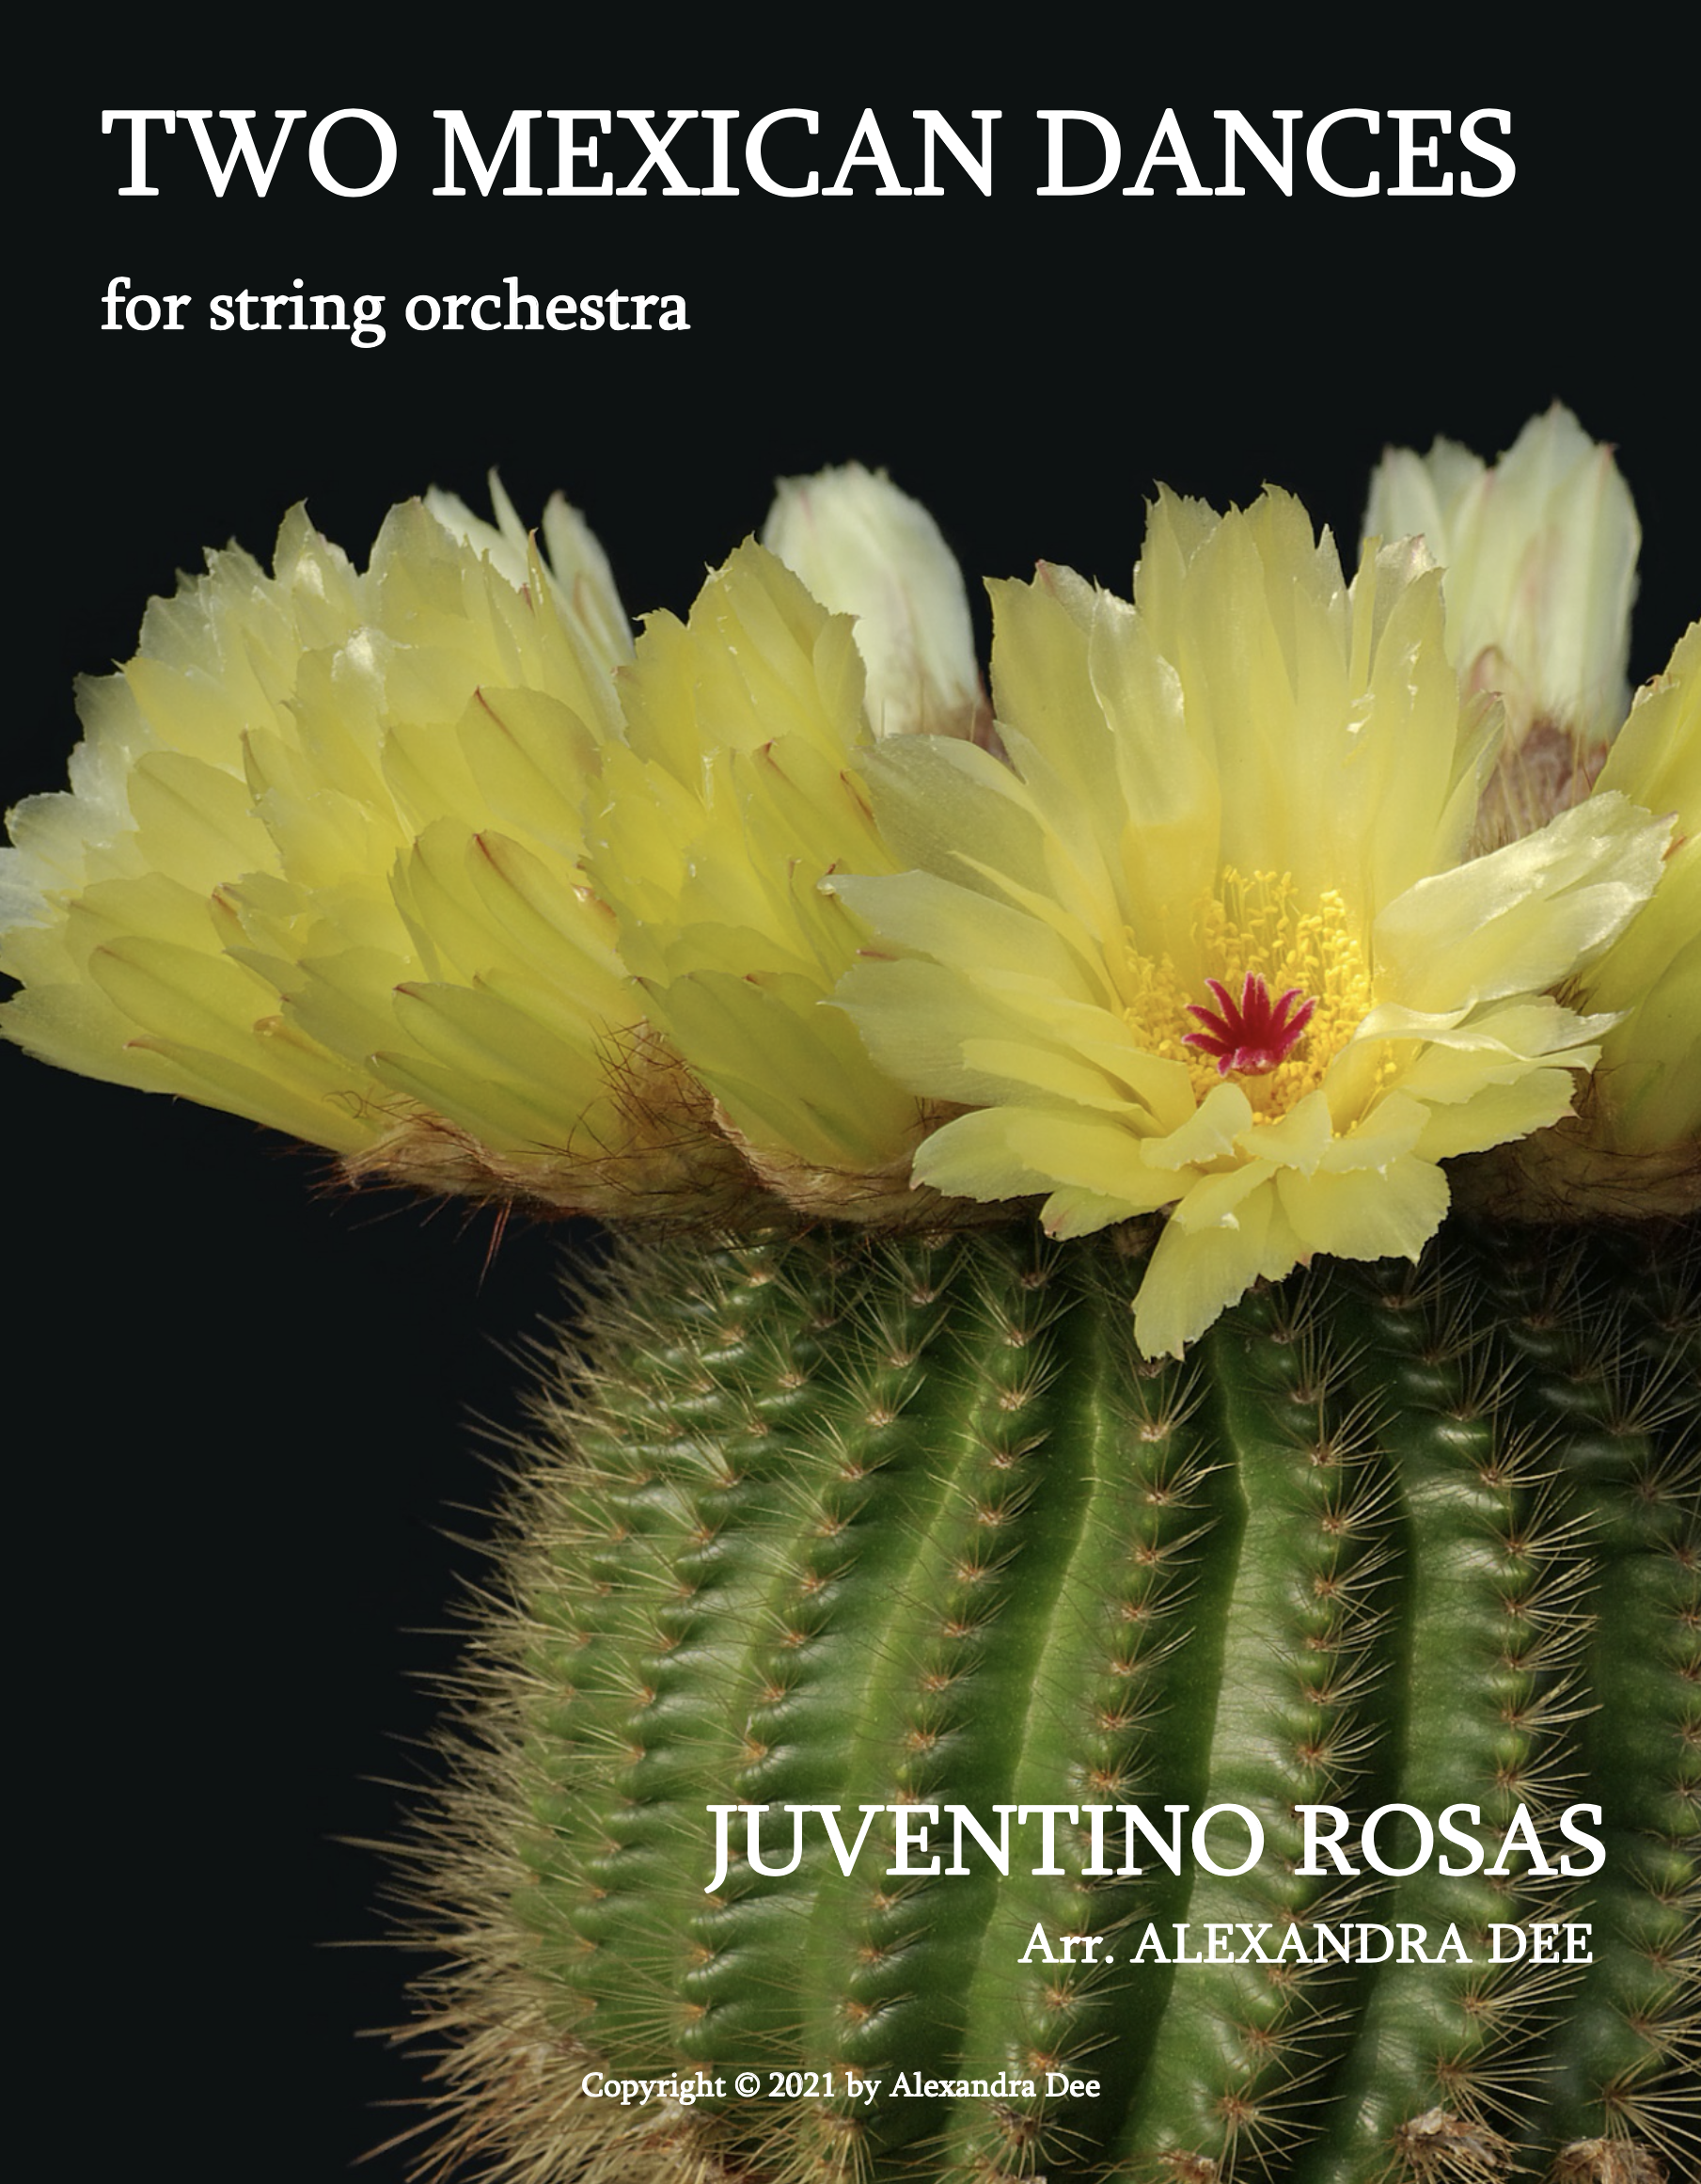 Two Mexican Dances by Juventino Rosas, arr. Dee